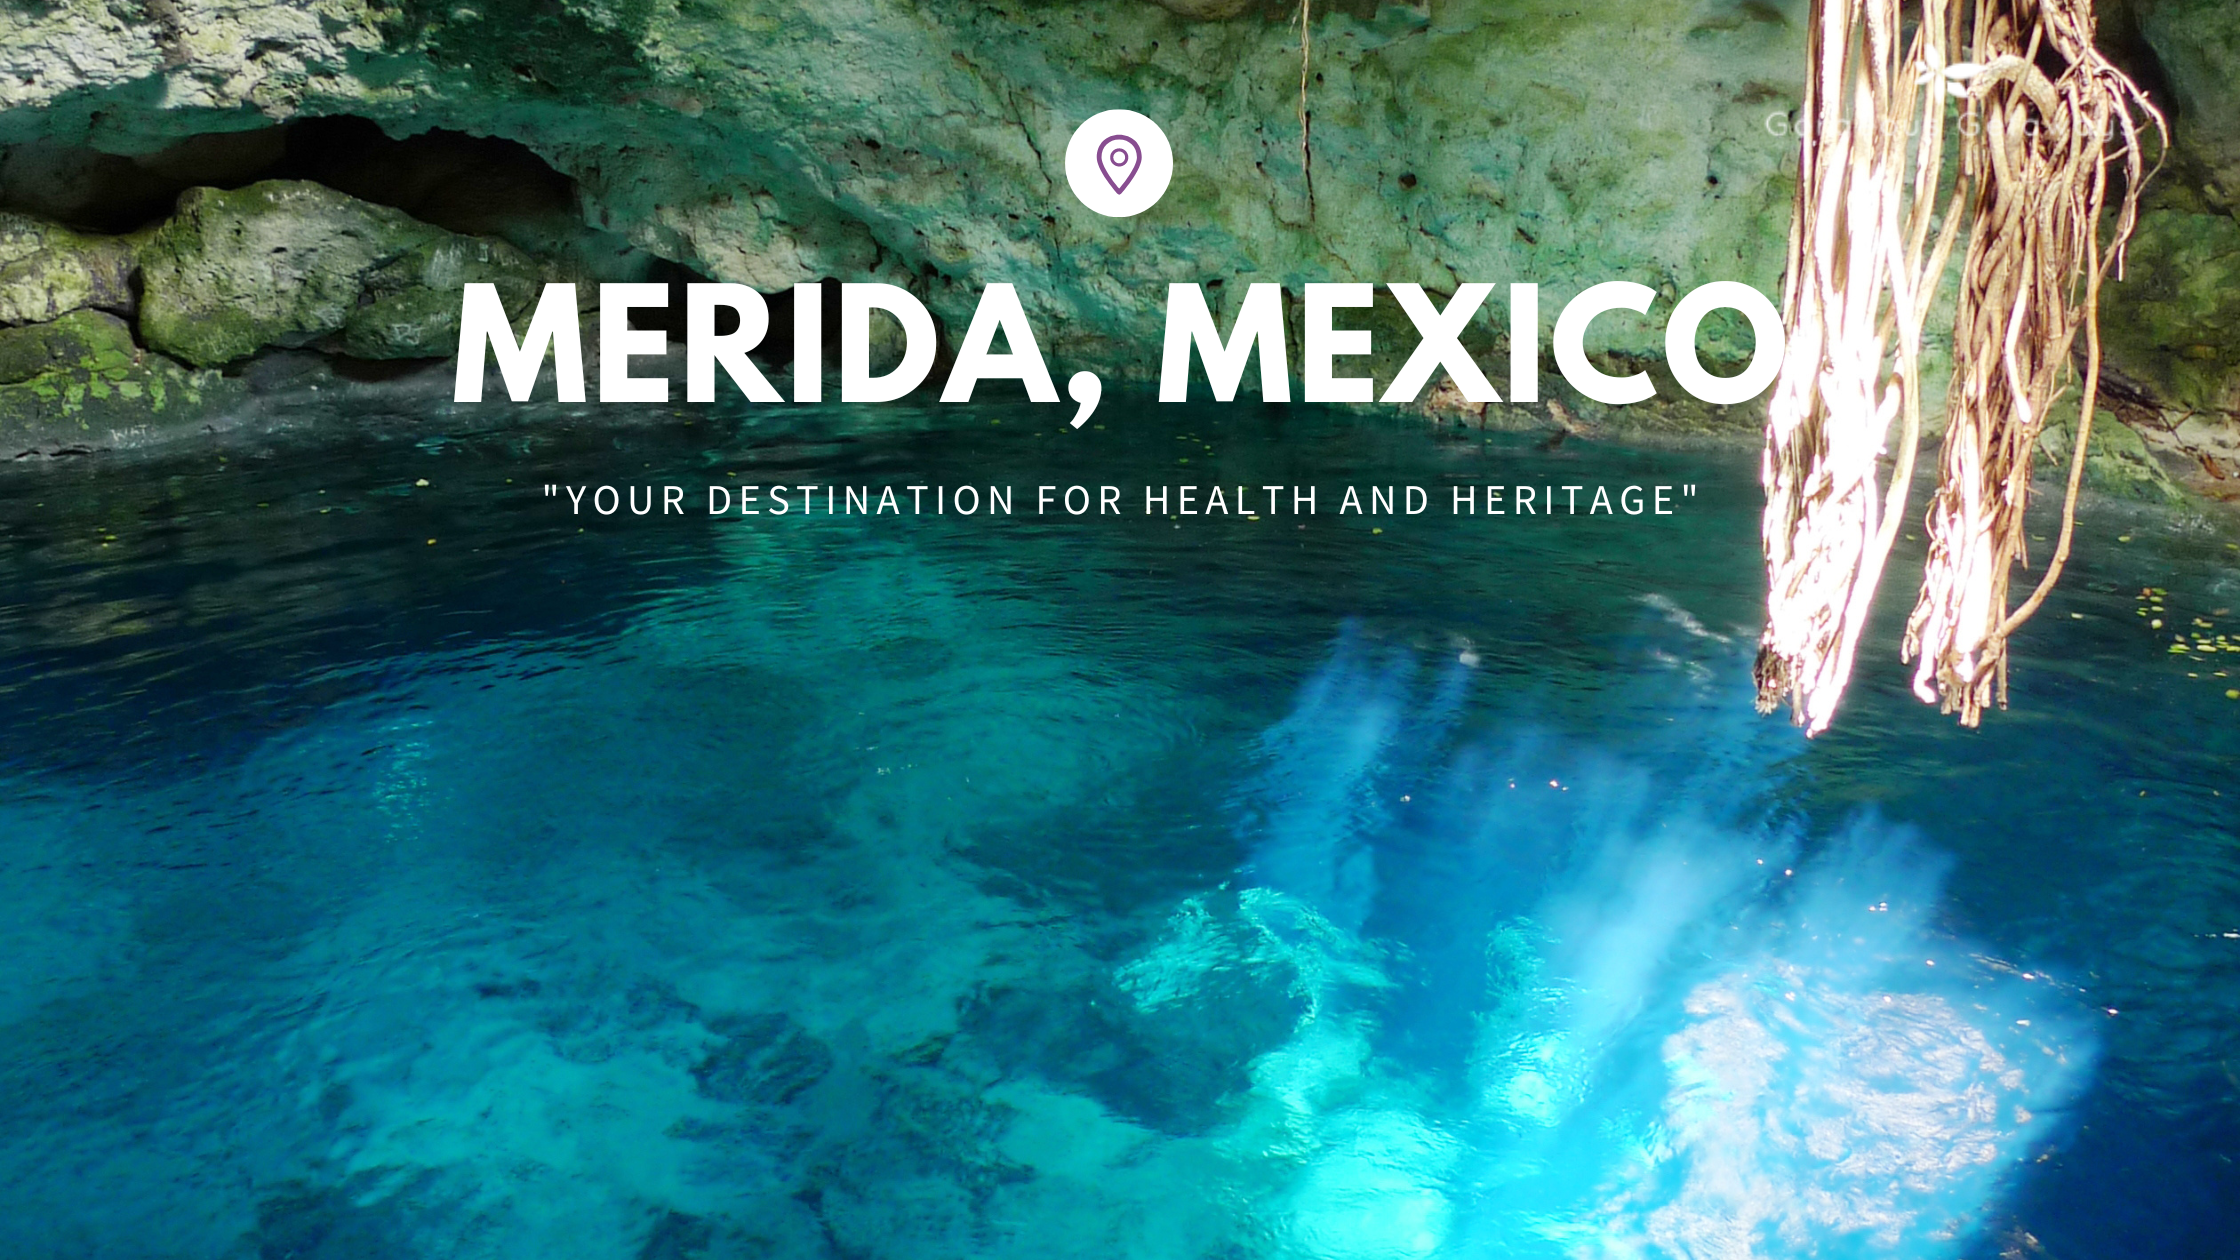 Merida Medical Tourism Your Destination for Health and Heritage